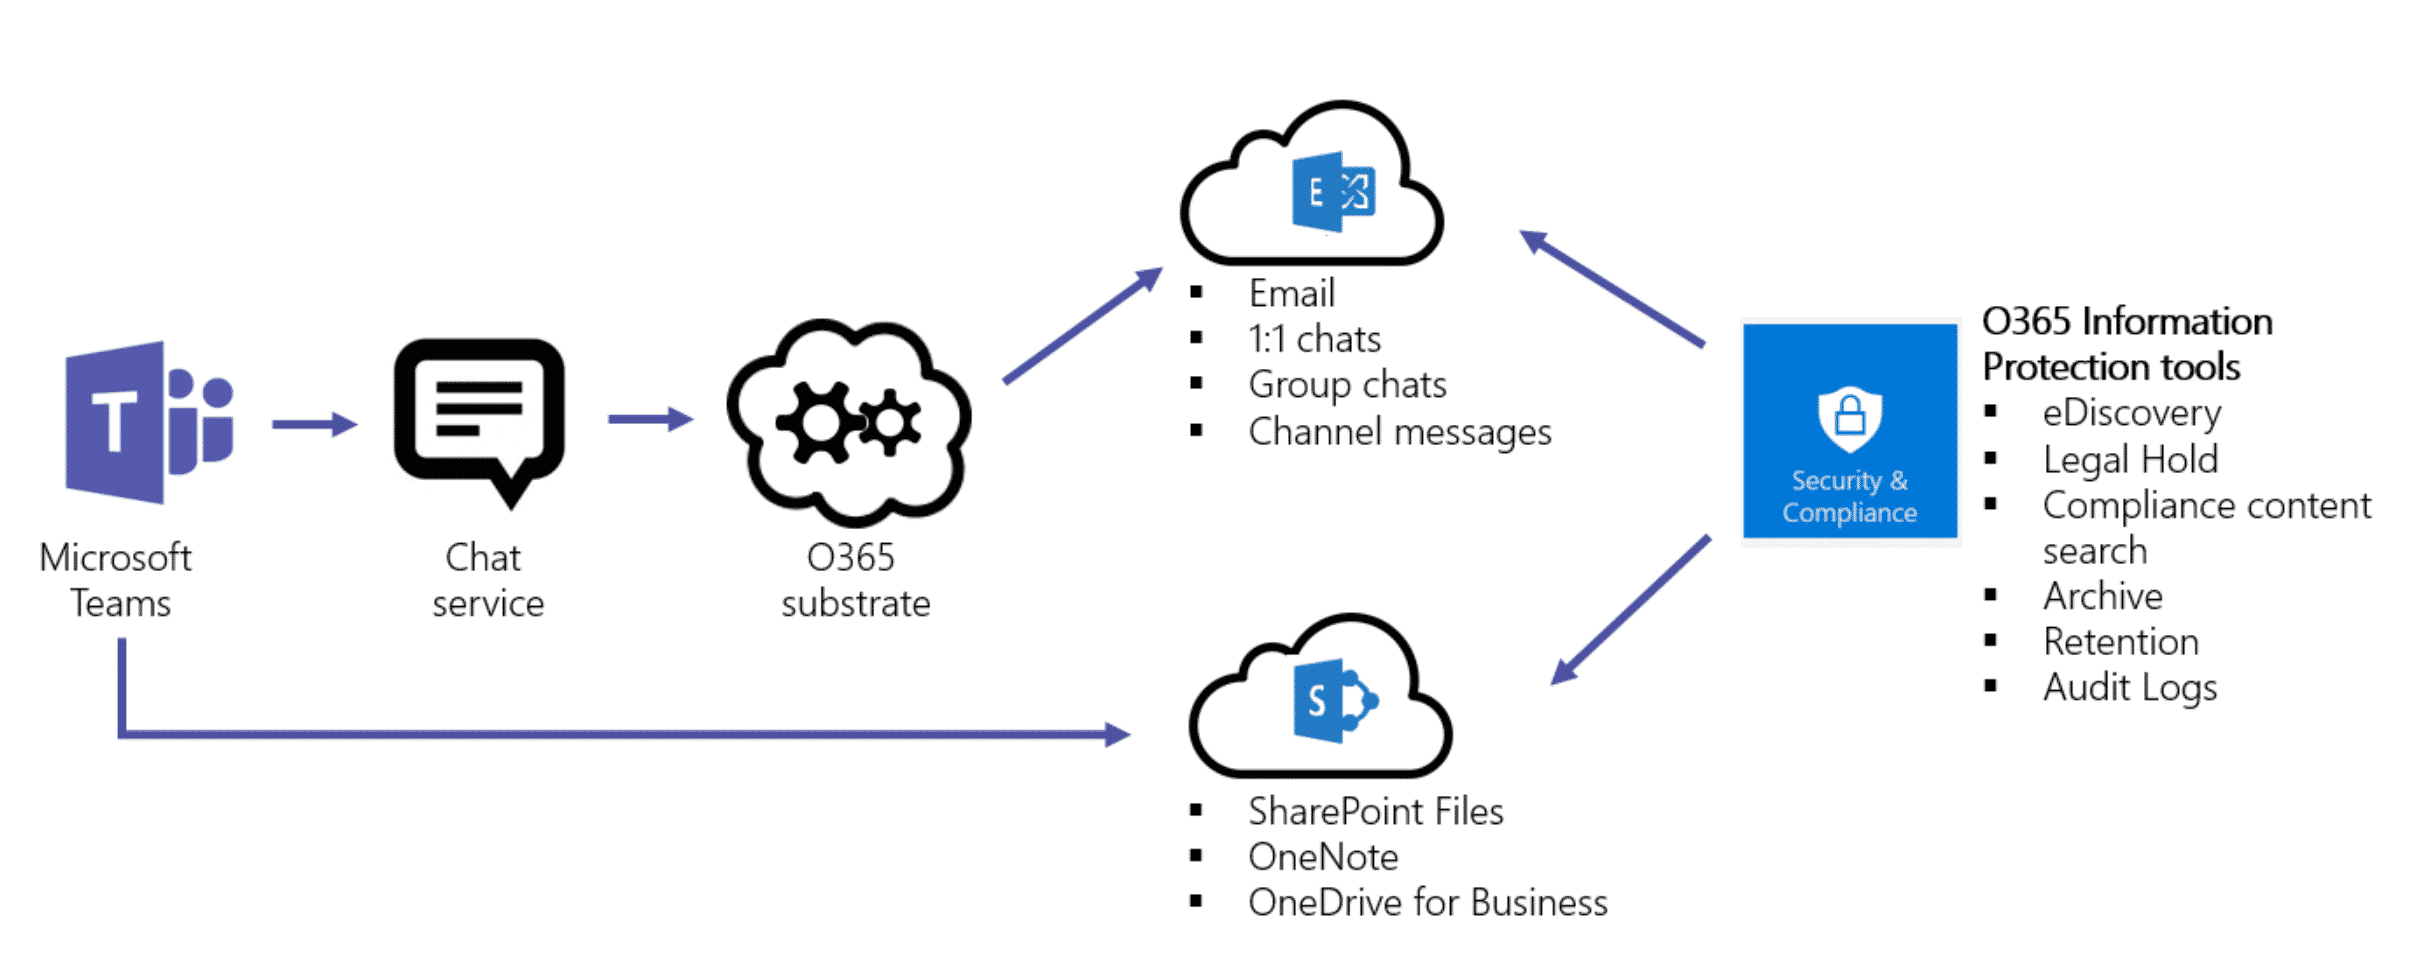 A graphic showing the path of information as it is encrypted from Microsoft Teams through Microsoft 365.